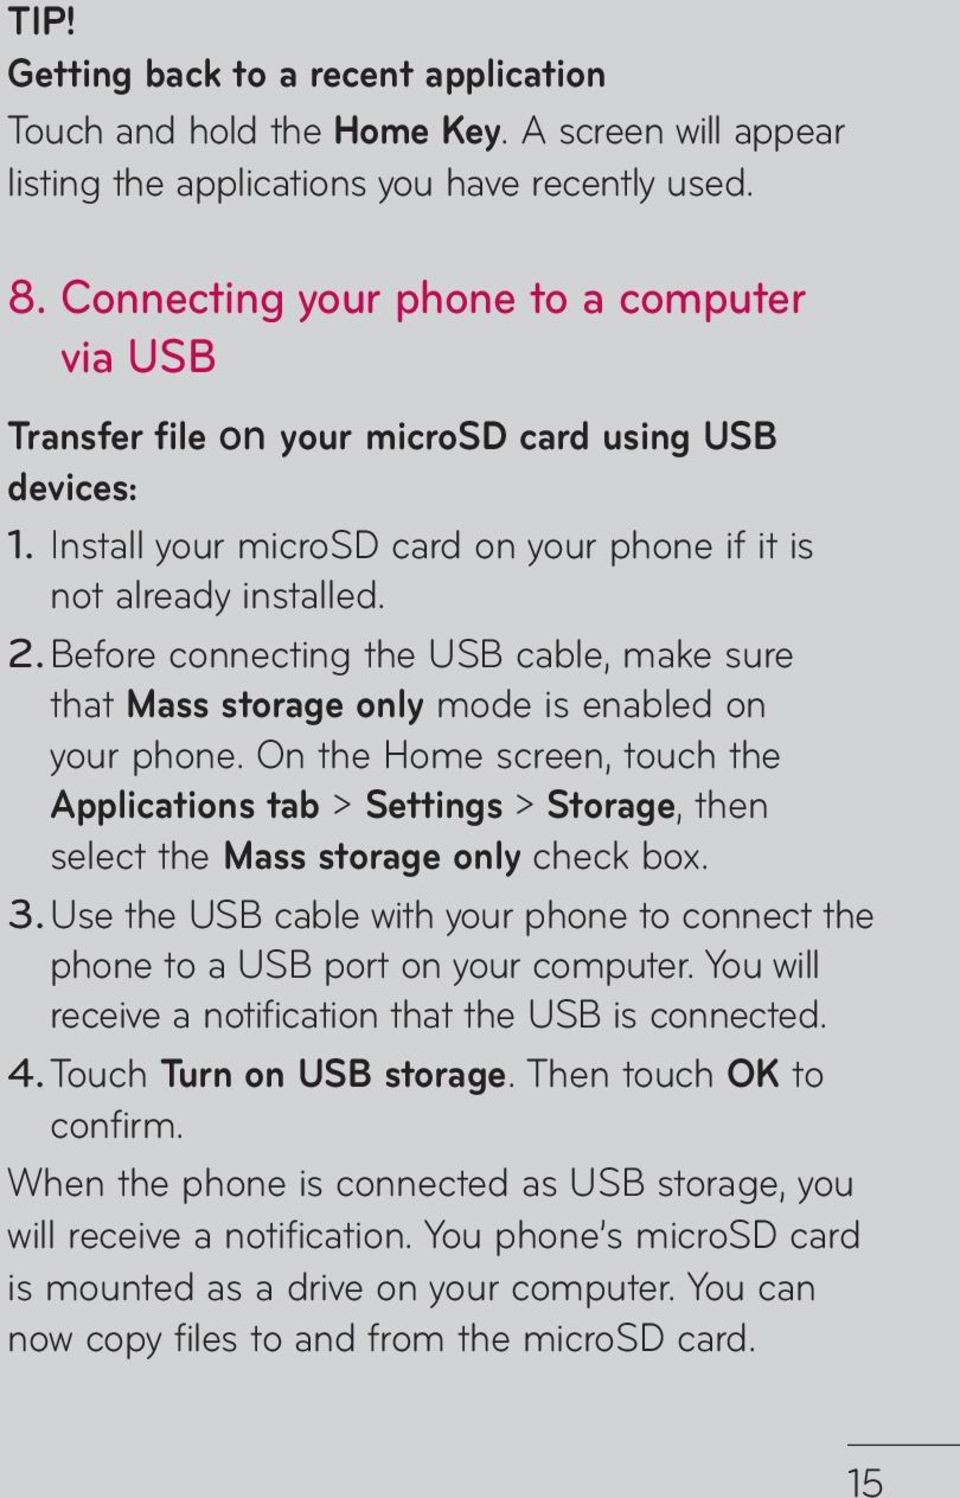 Before connecting the USB cable, make sure that Mass storage only mode is enabled on your phone.